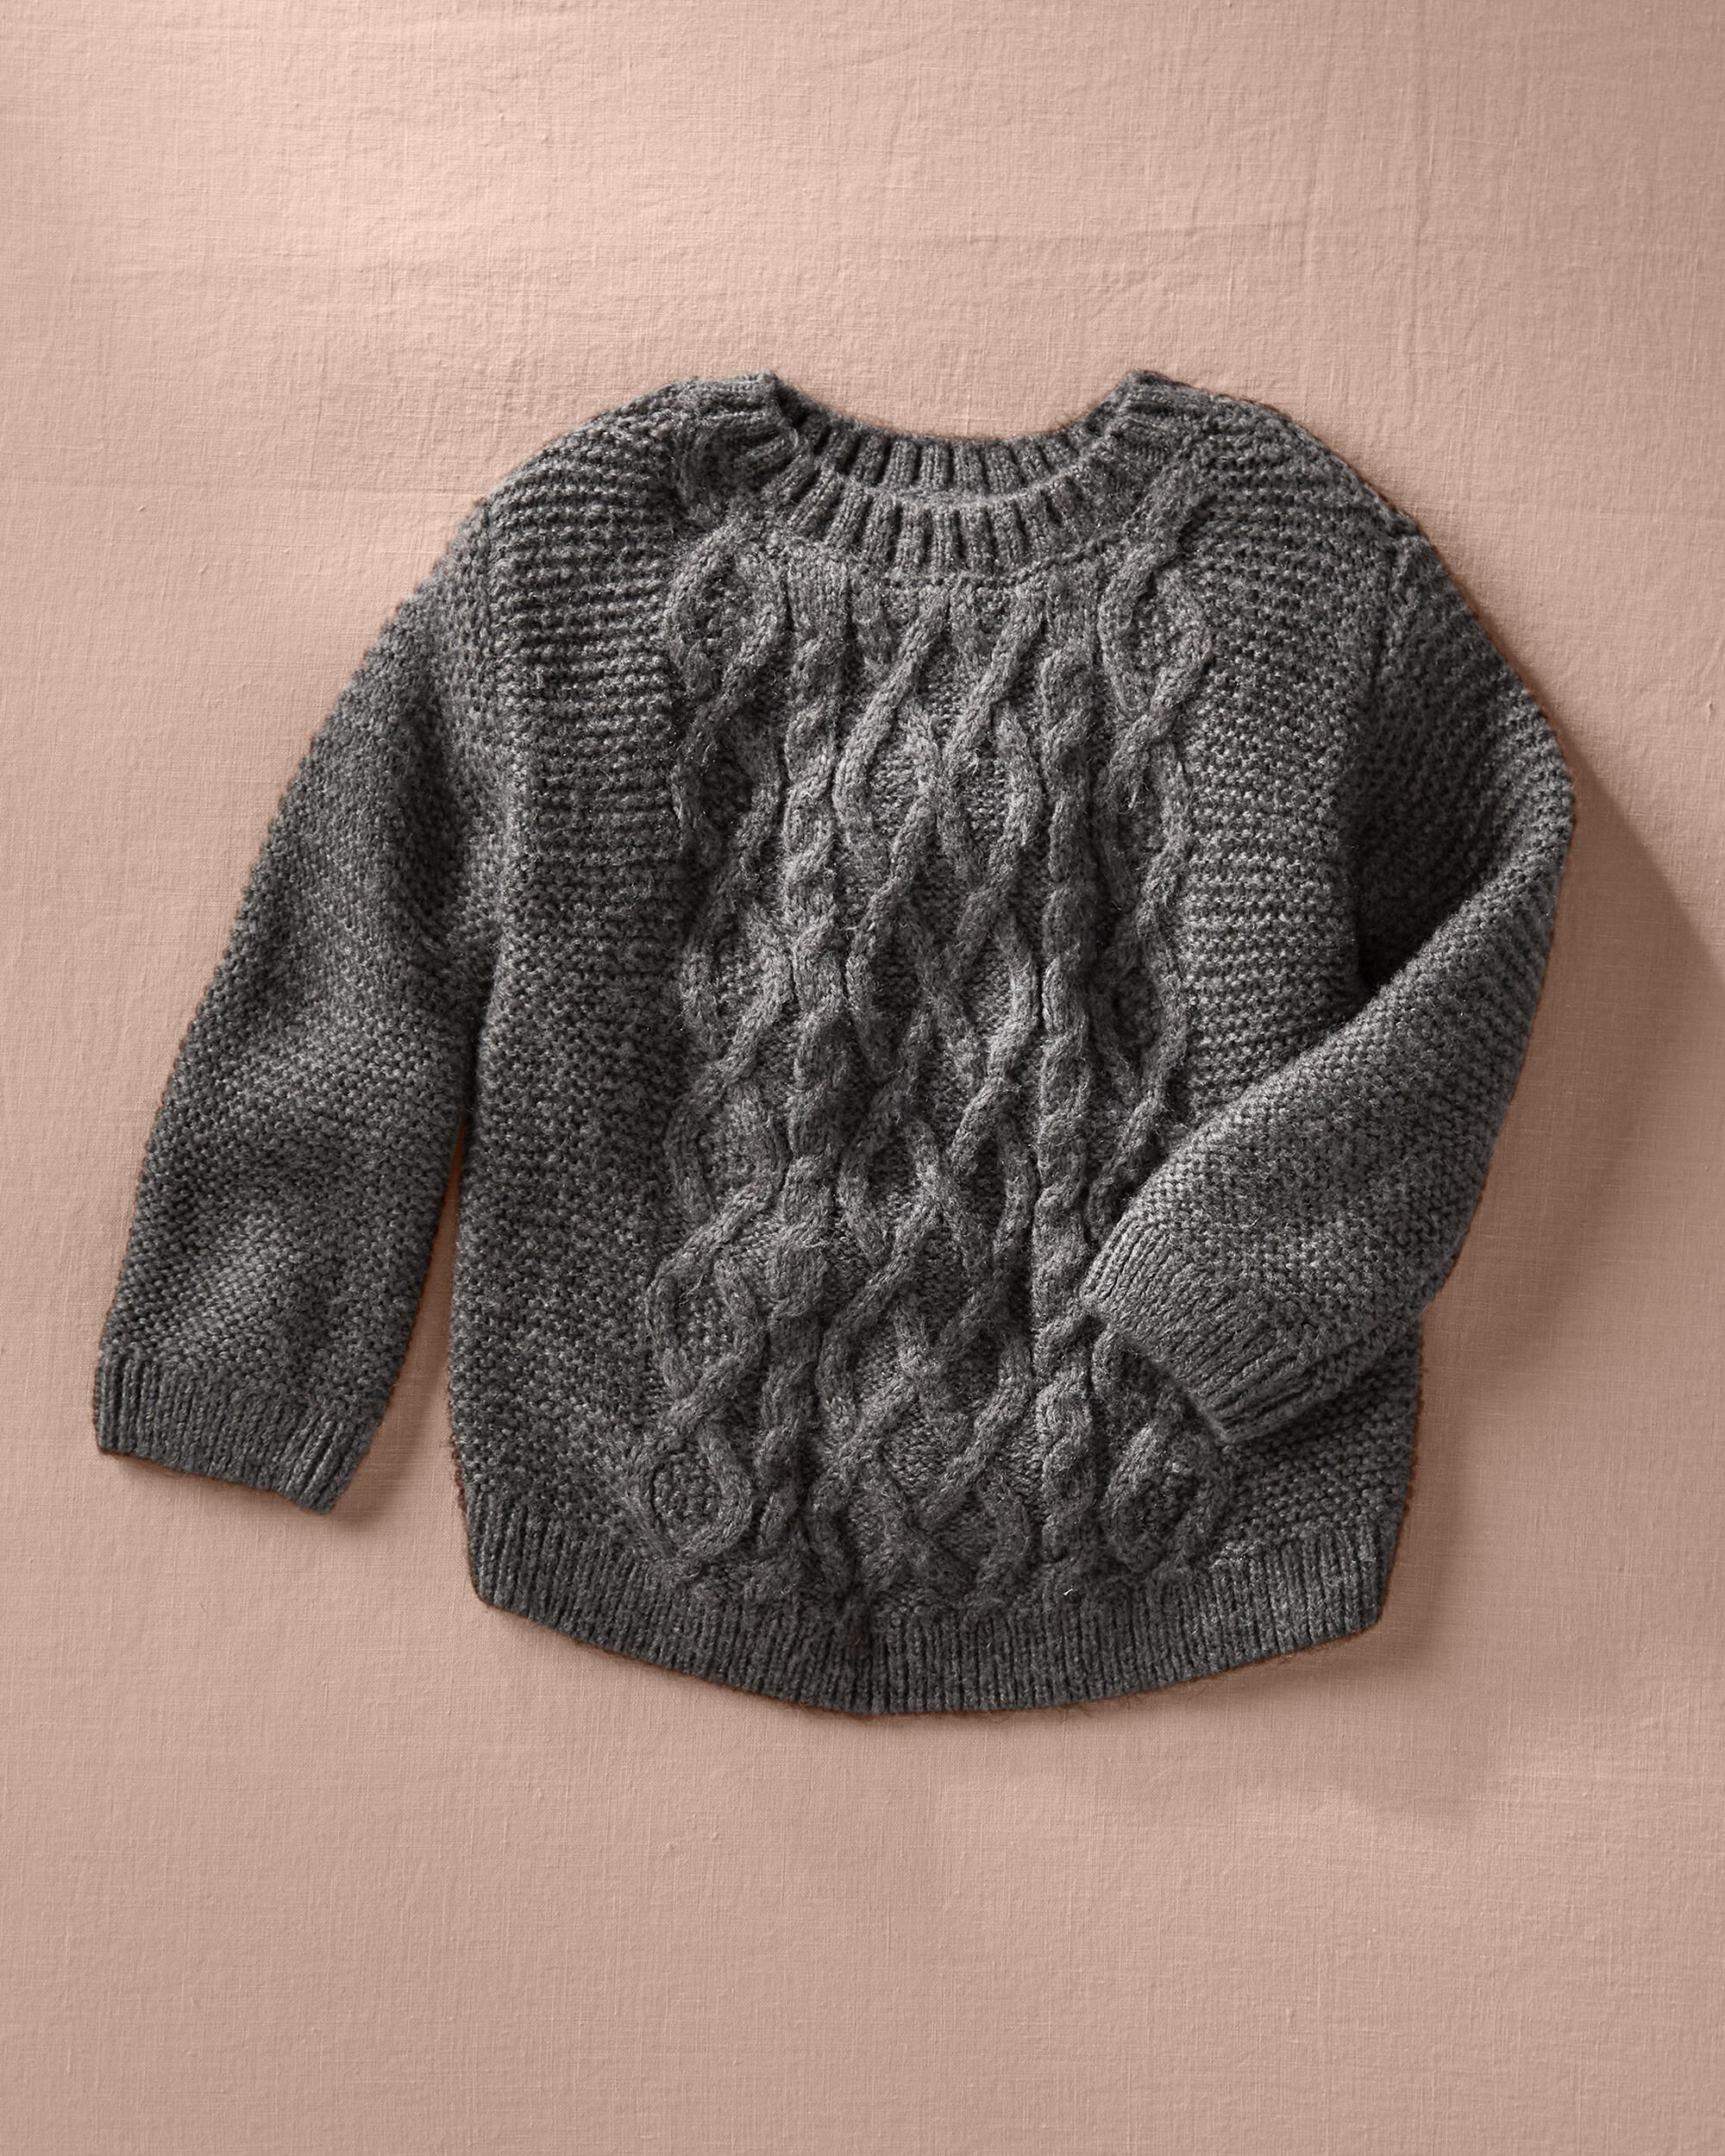 SALE knitted cable jumper Clothing Boys Clothing Baby Boys Clothing Jumpers 